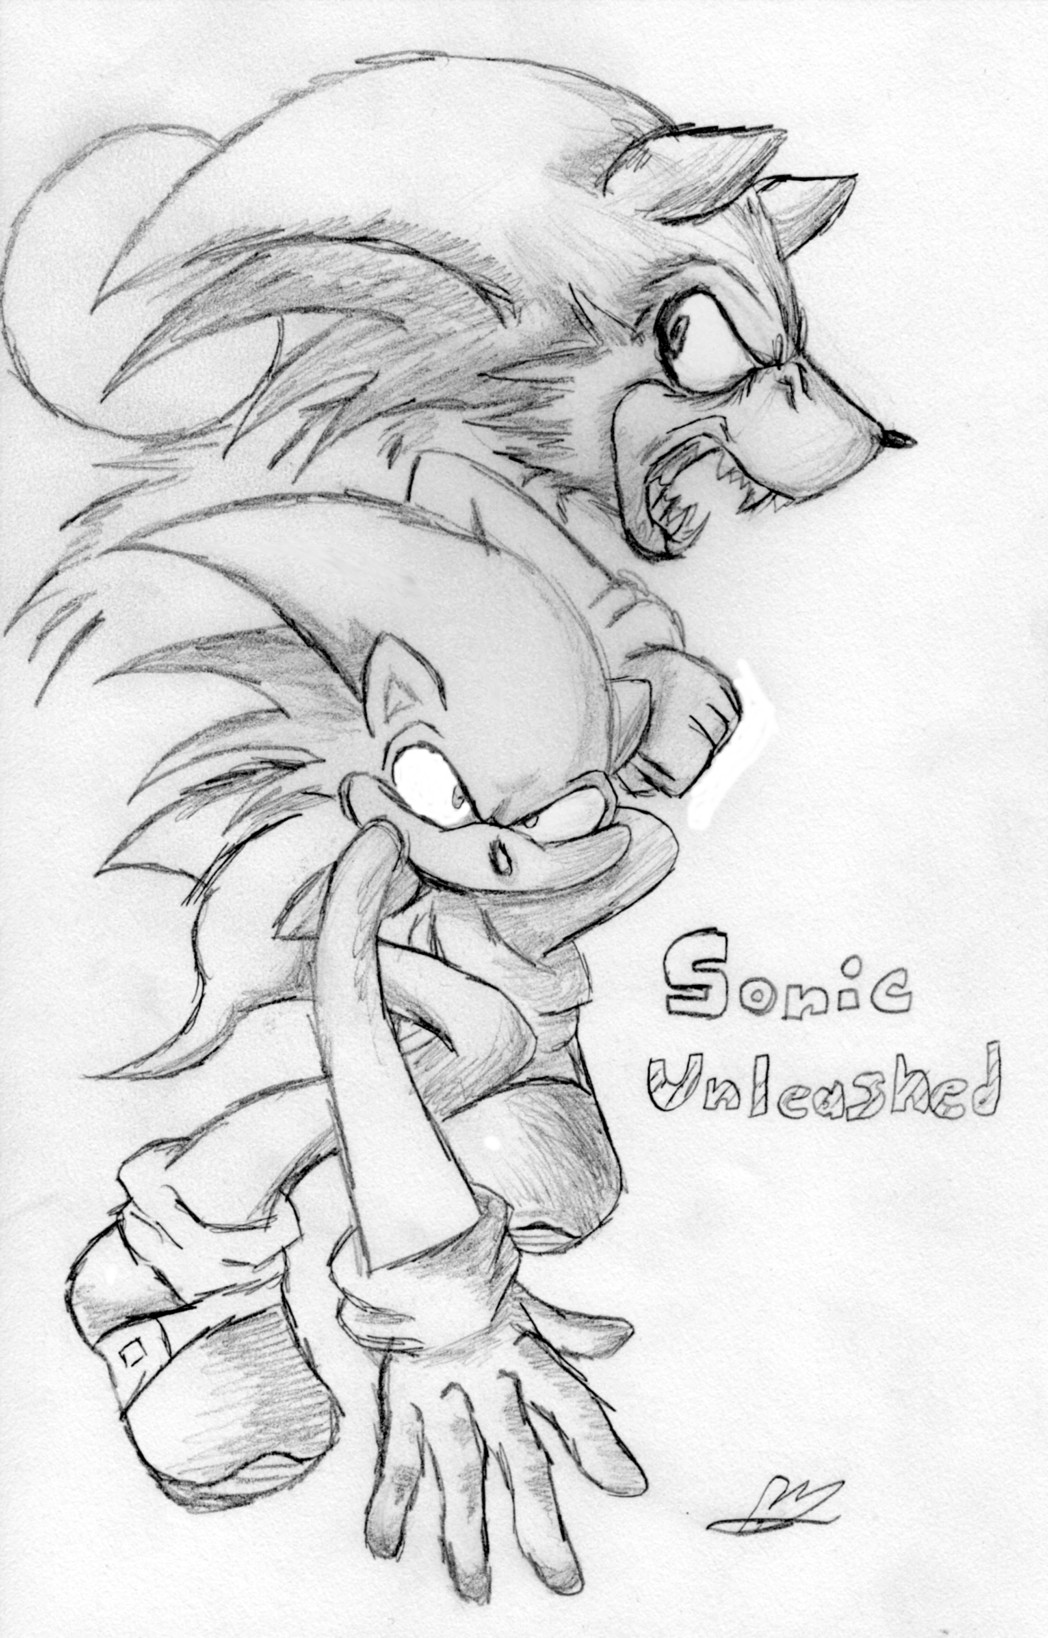 OMG. MOAR SONIC UNLEASHED. by TheGameArtCritic